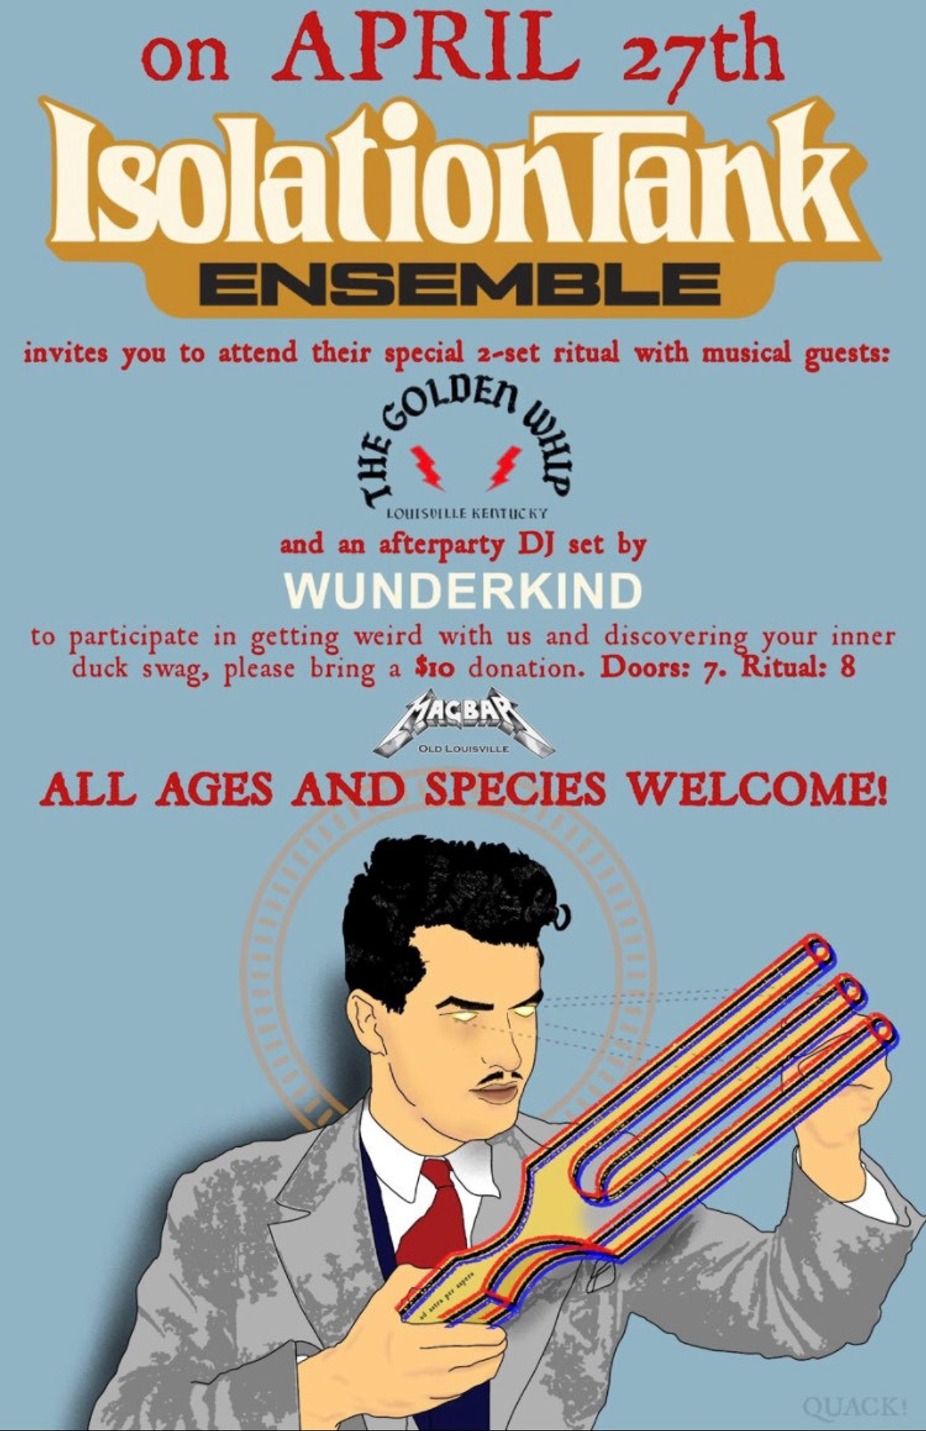 All Ages - Isolation Tank Ensemble with The Golden Whip Plus an After Party set by DJ Wunderkind event photo